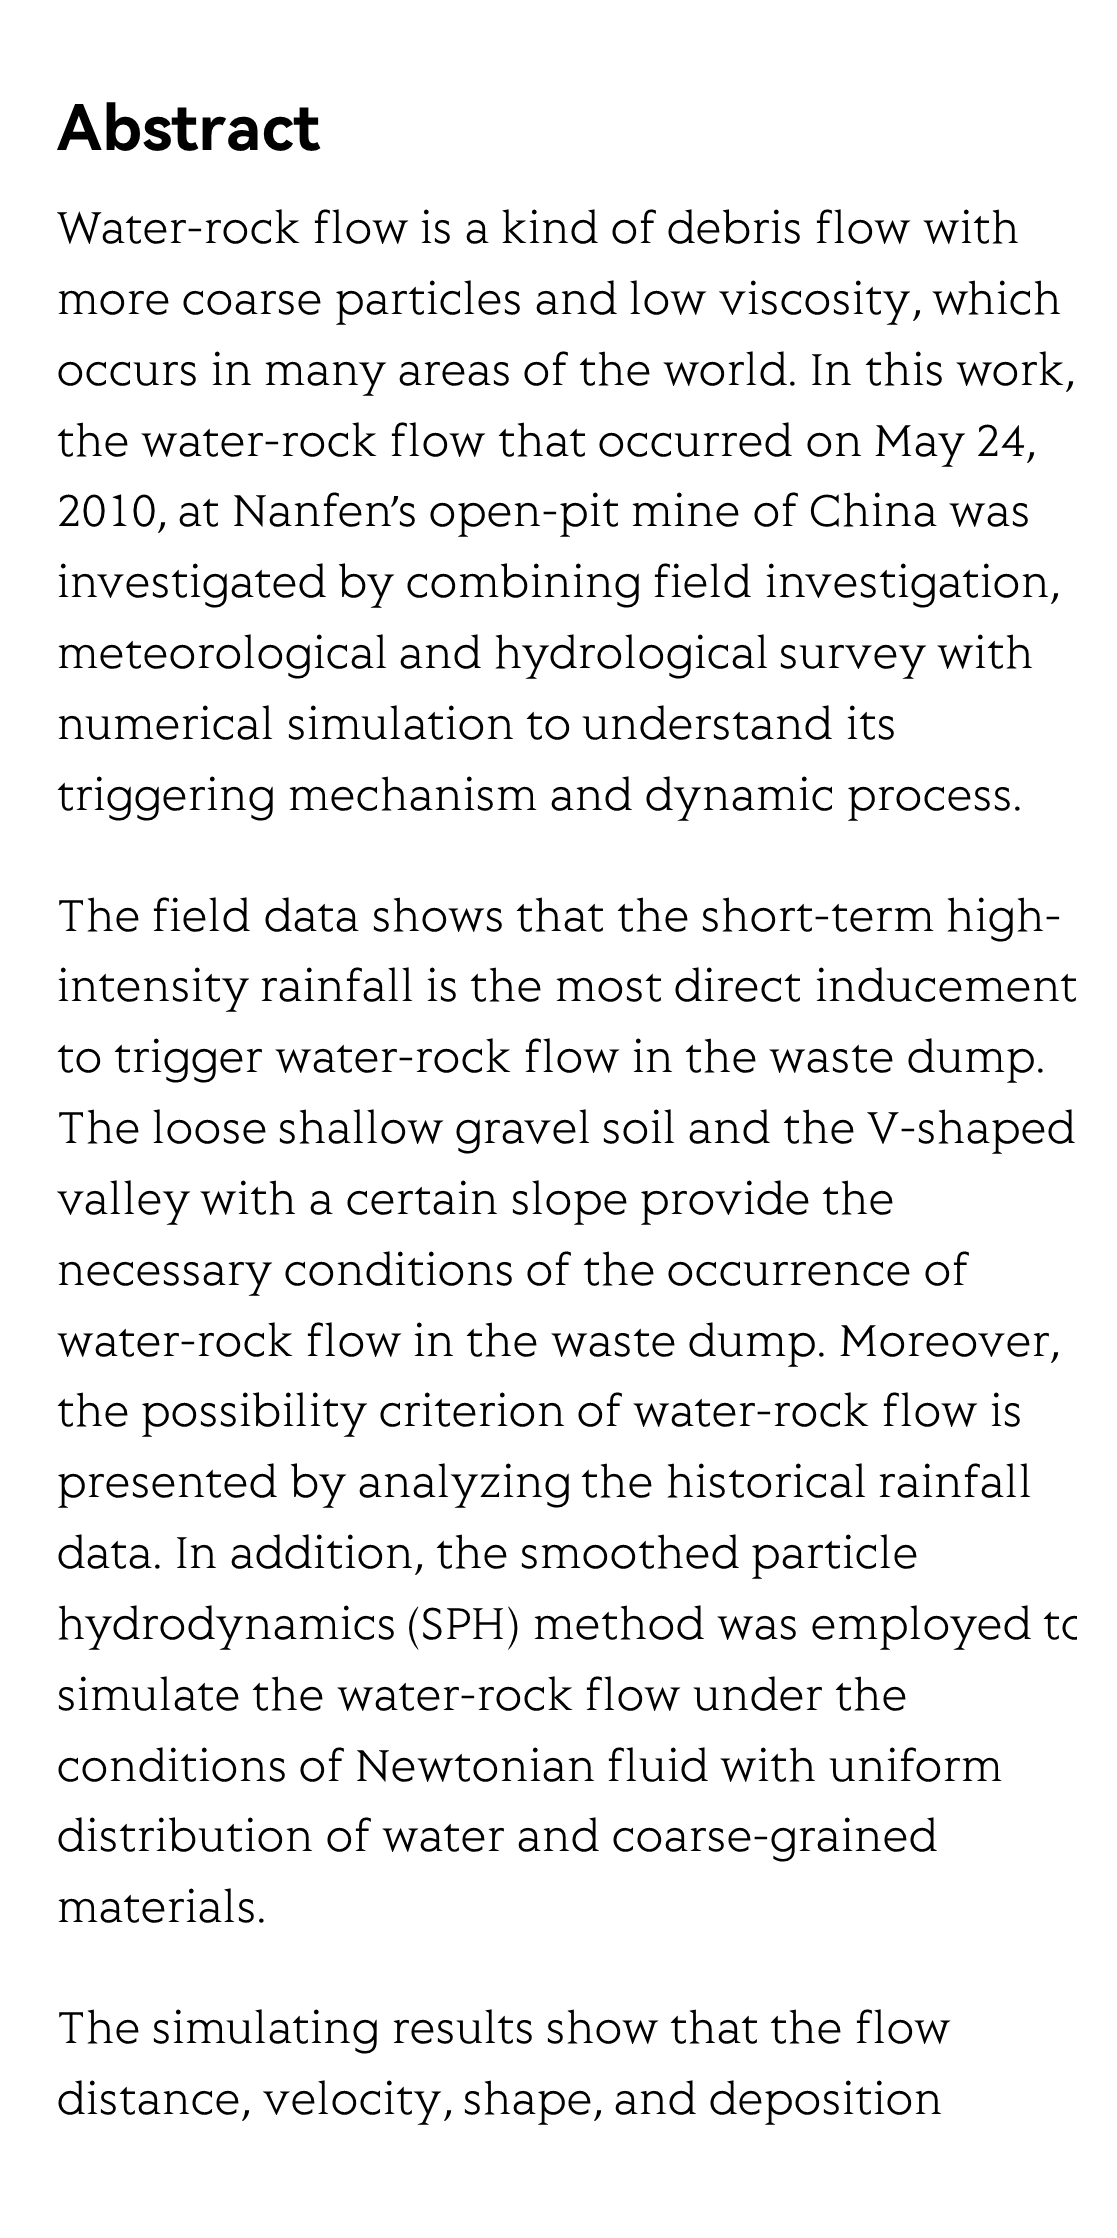 Triggering mechanism and dynamic process of water-rock flow in Nanfen waste dump in 2010_2